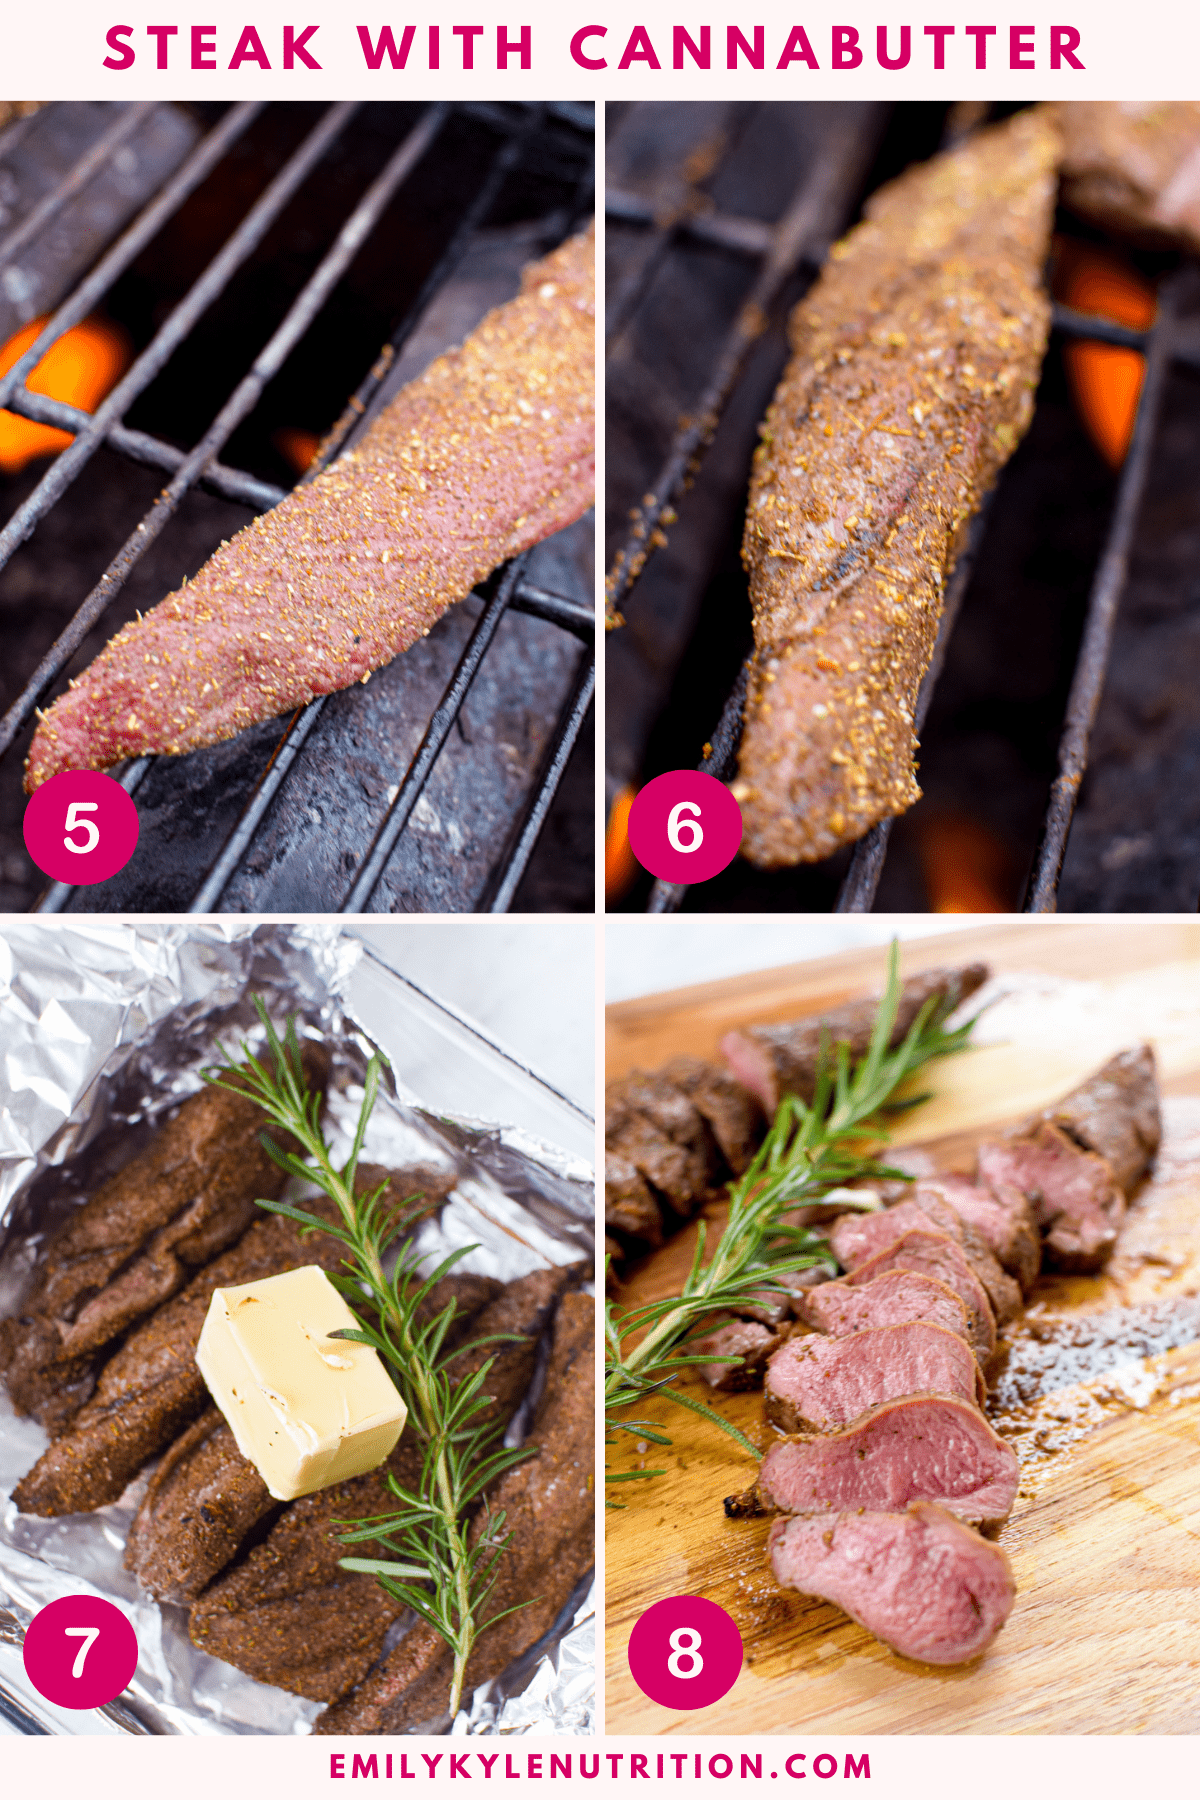 A four step image collage showing the last four seps needed to make steak with cannabutter.